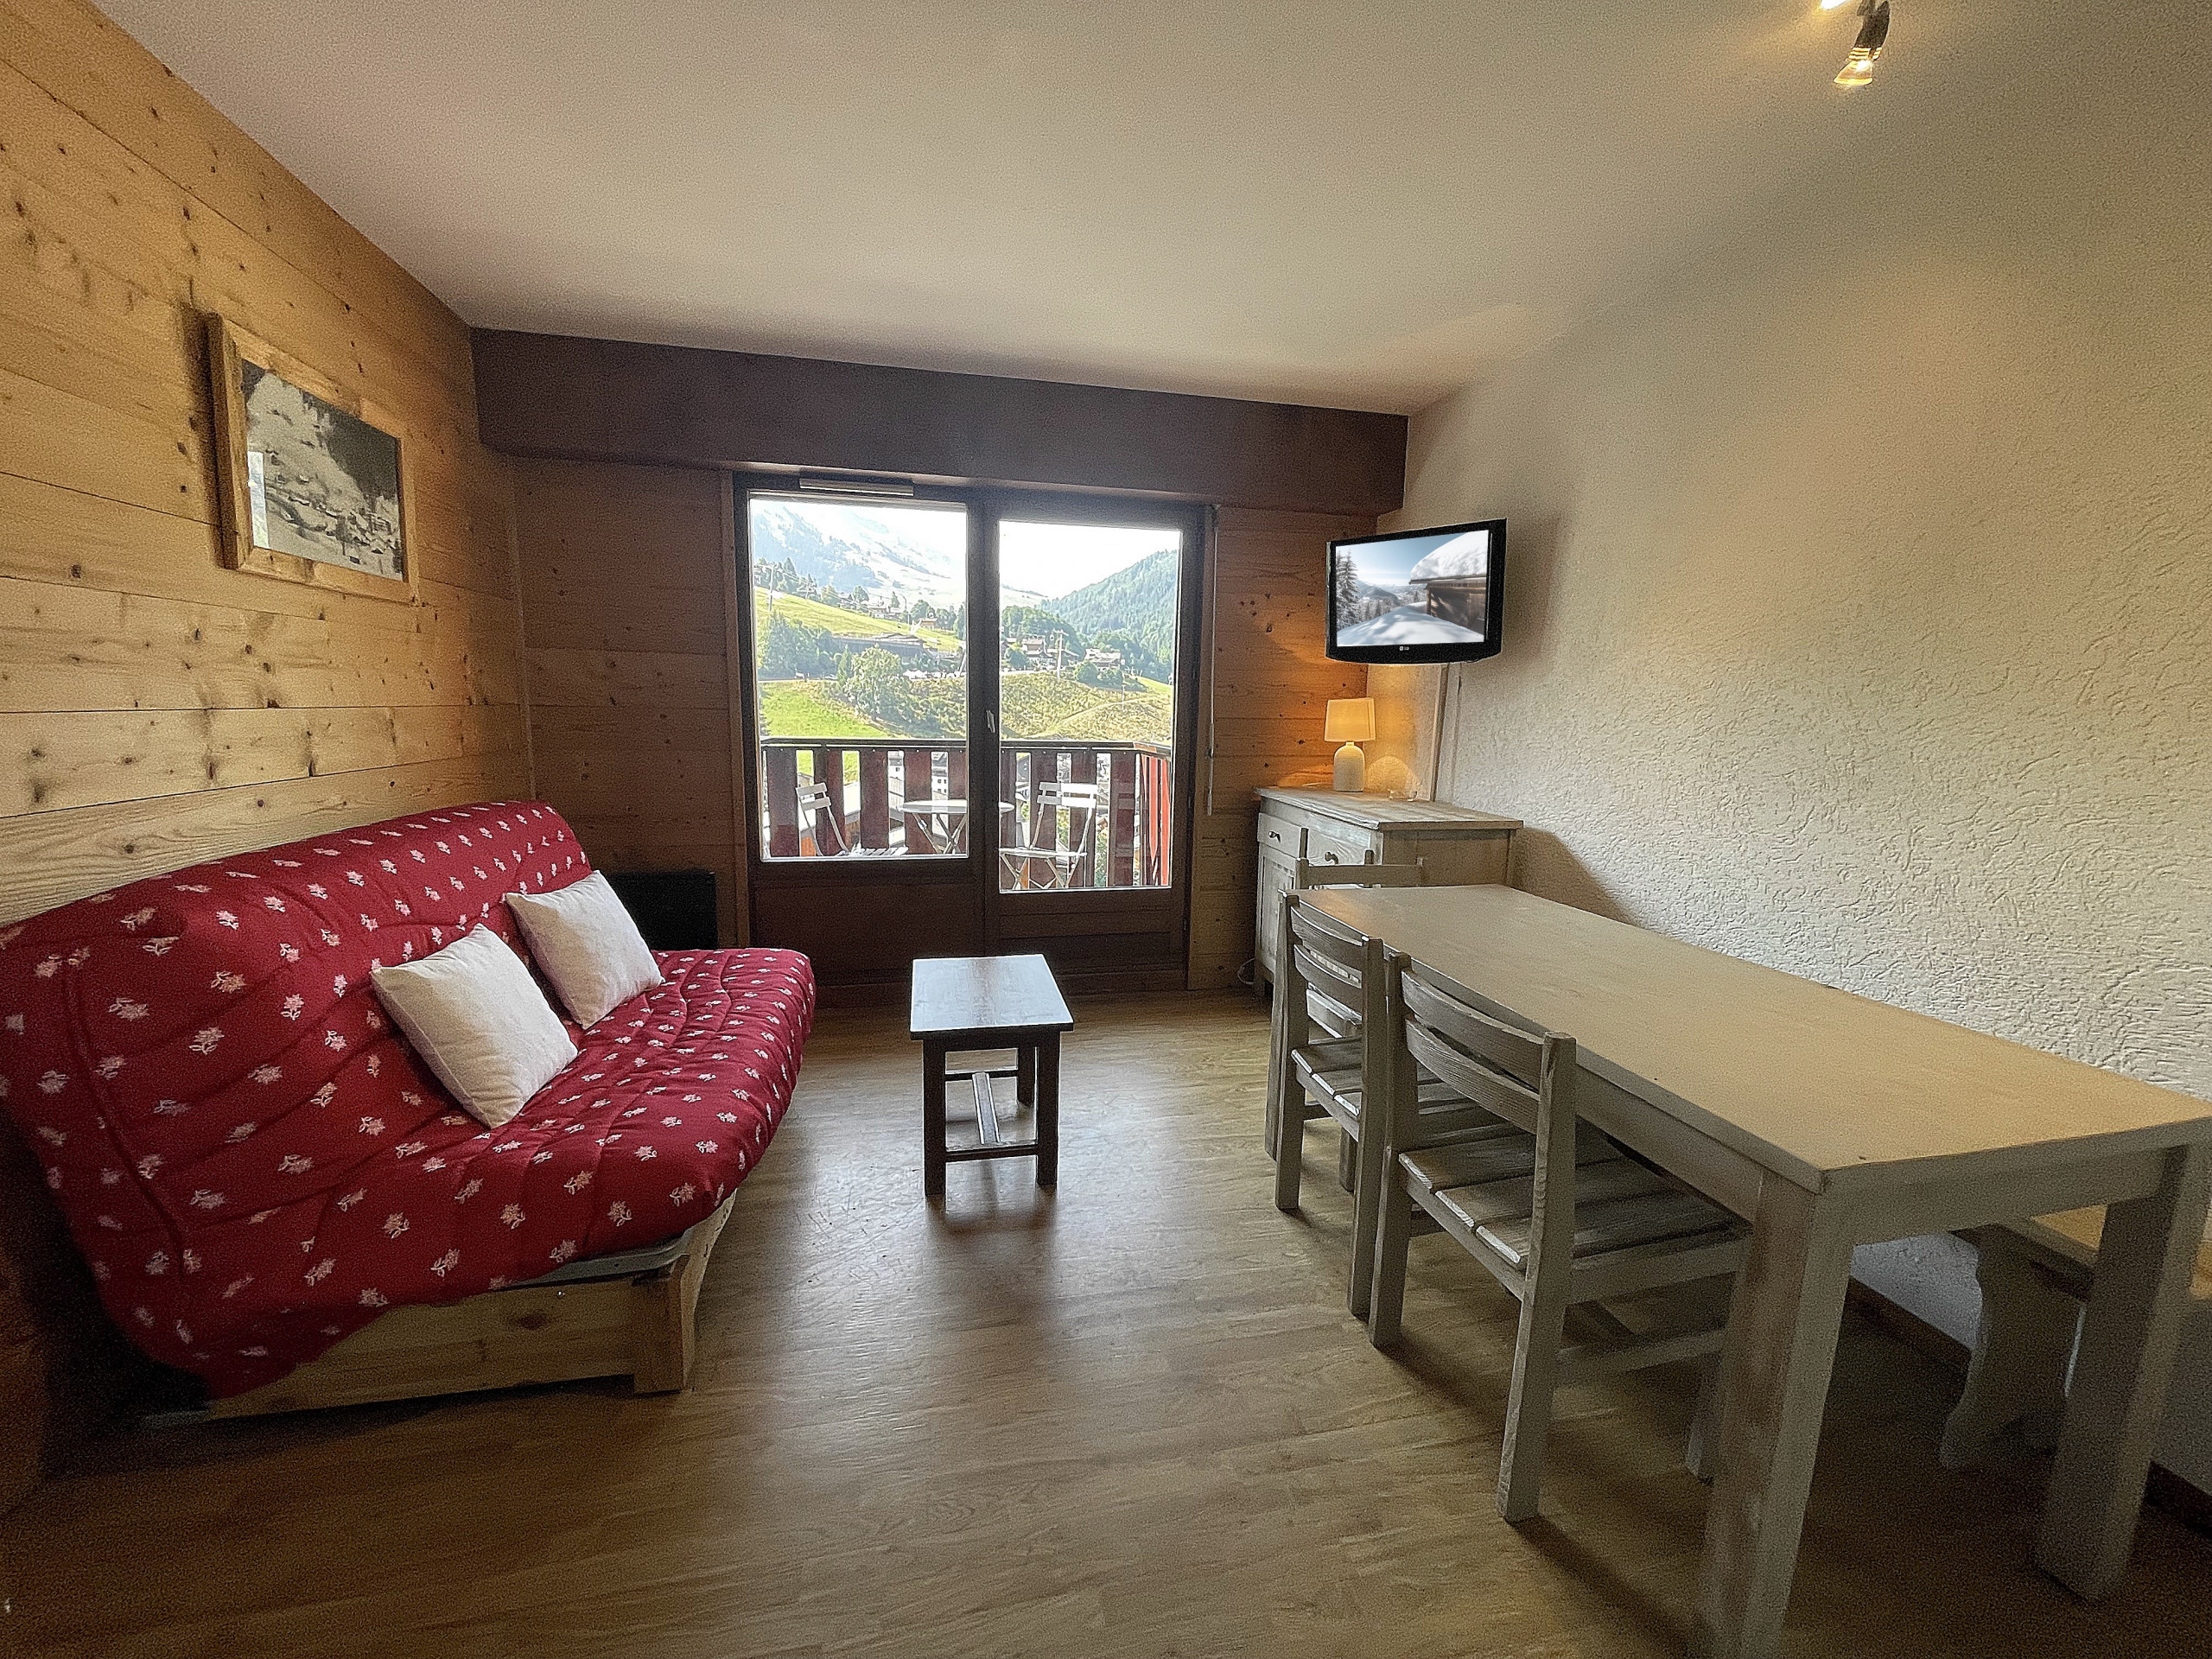  in La Clusaz - Residence 2-234 - 2 rooms 4 pers. 2*,  nice view